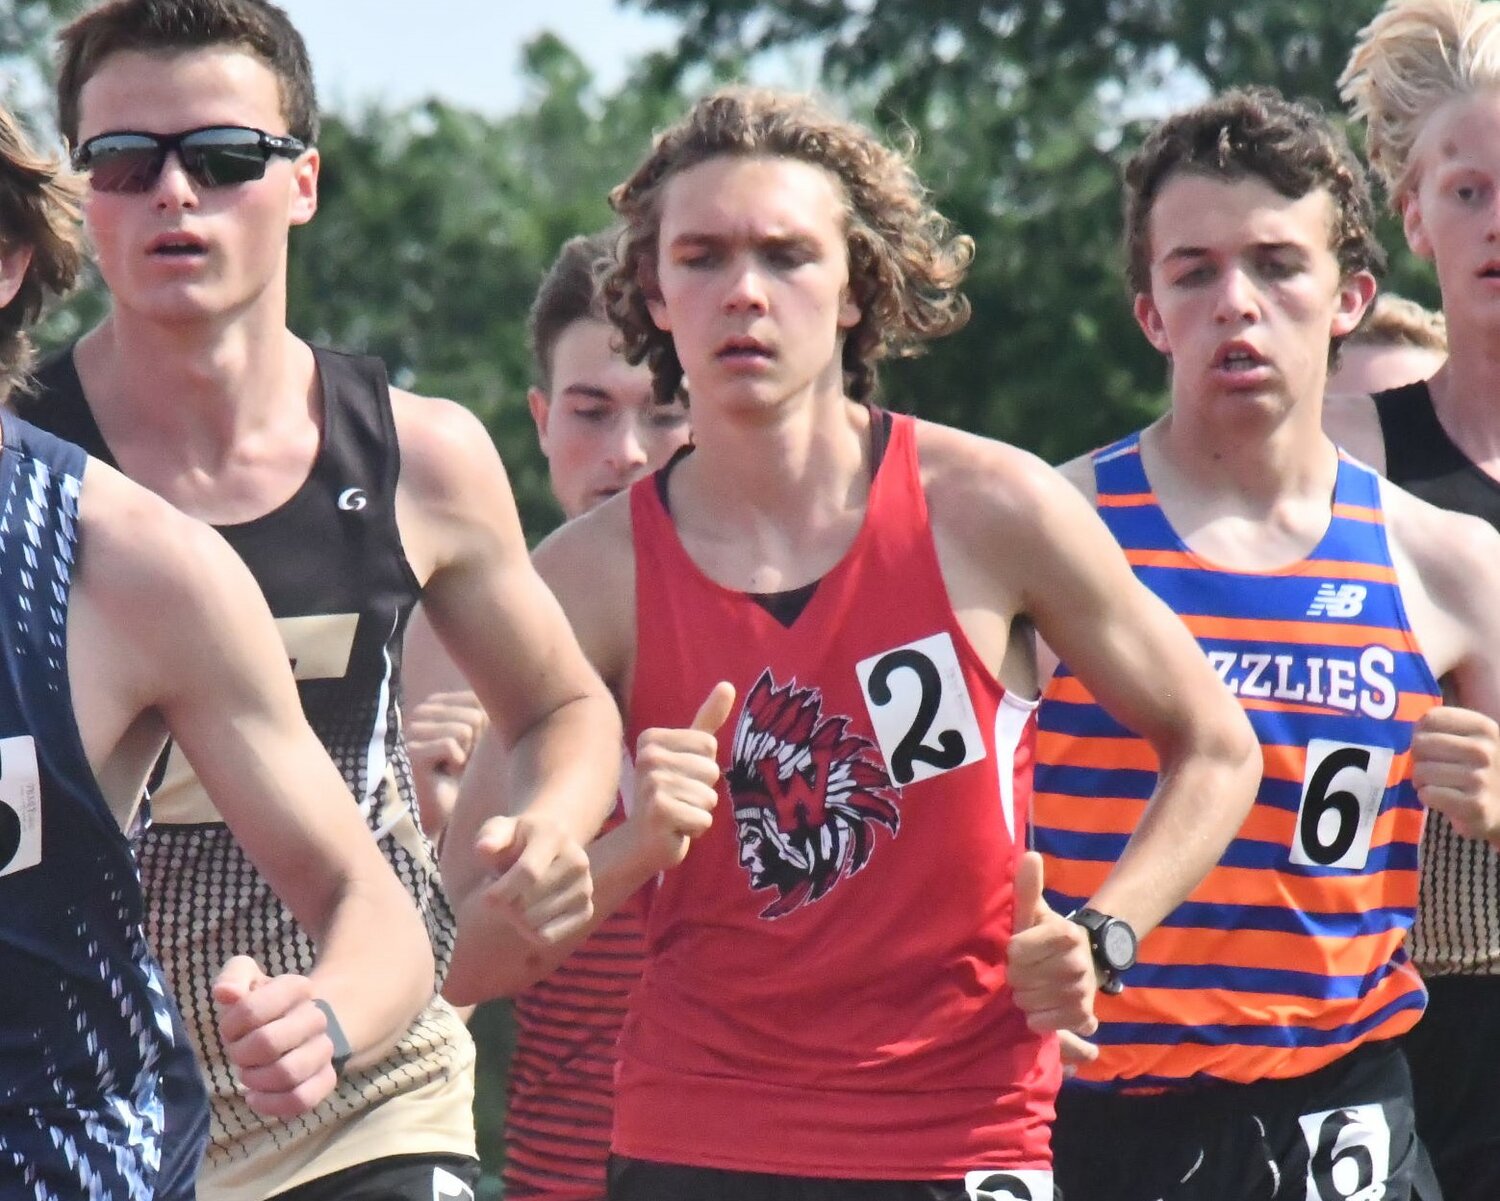 Wyatt Claiborne competes at the Class 4, District 4 track meet last weekend at North Point High School. Claiborne won the 3200-meter run and advanced to sectionals in four events.